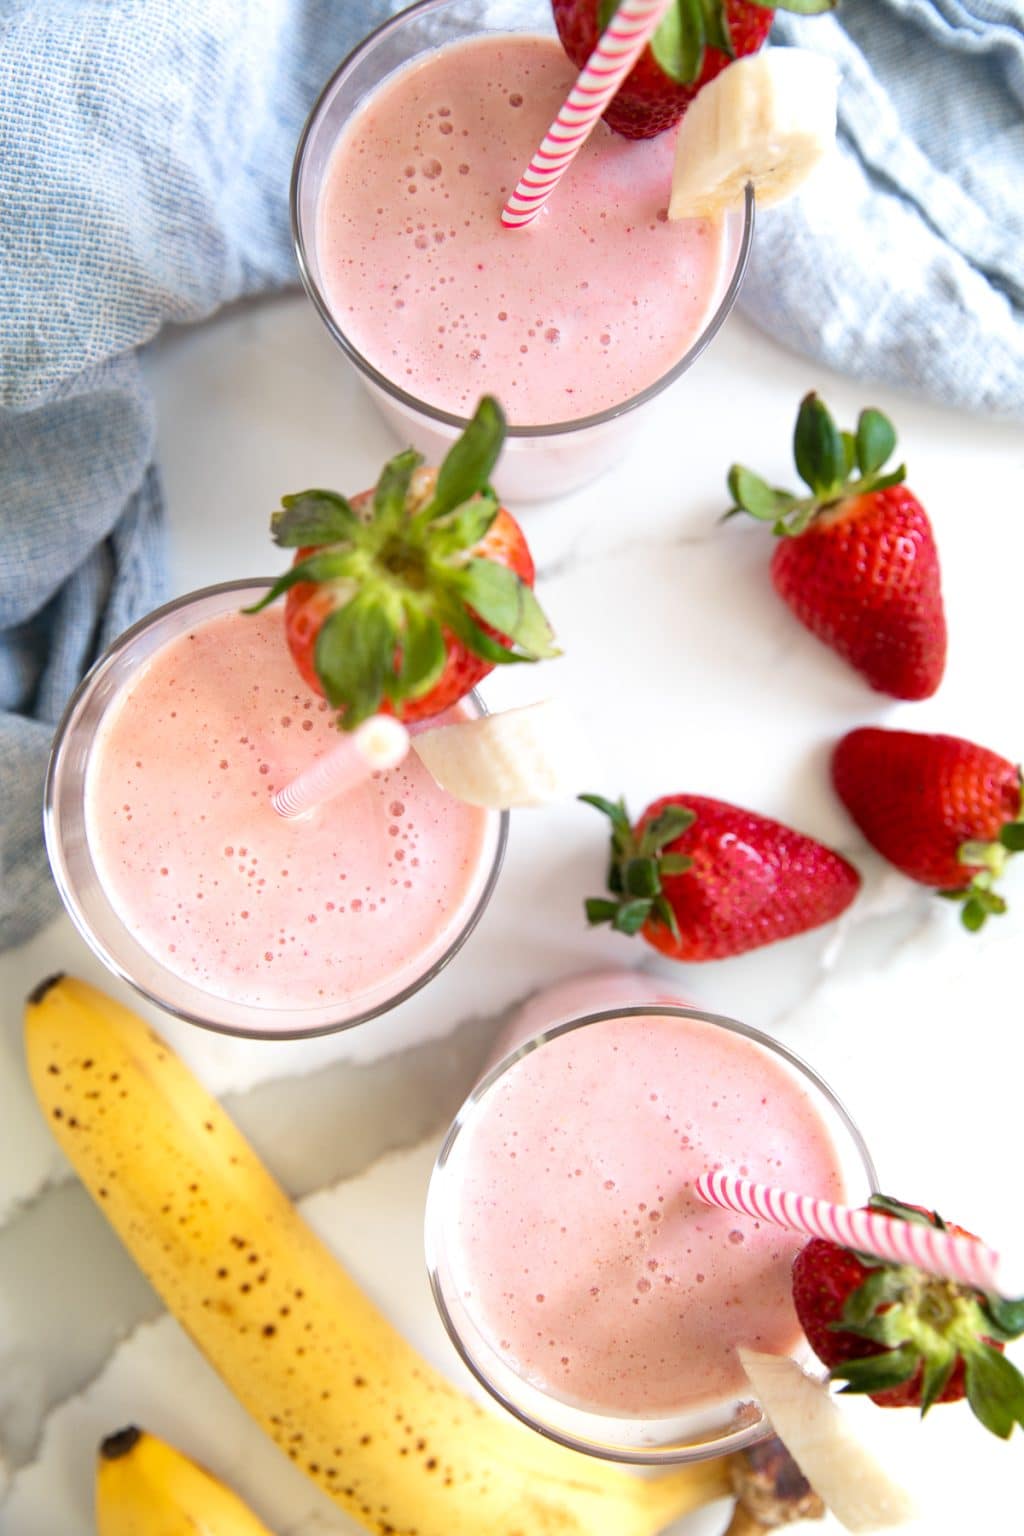 Easy Strawberry Banana Smoothie Recipe The Forked Spoon 2903